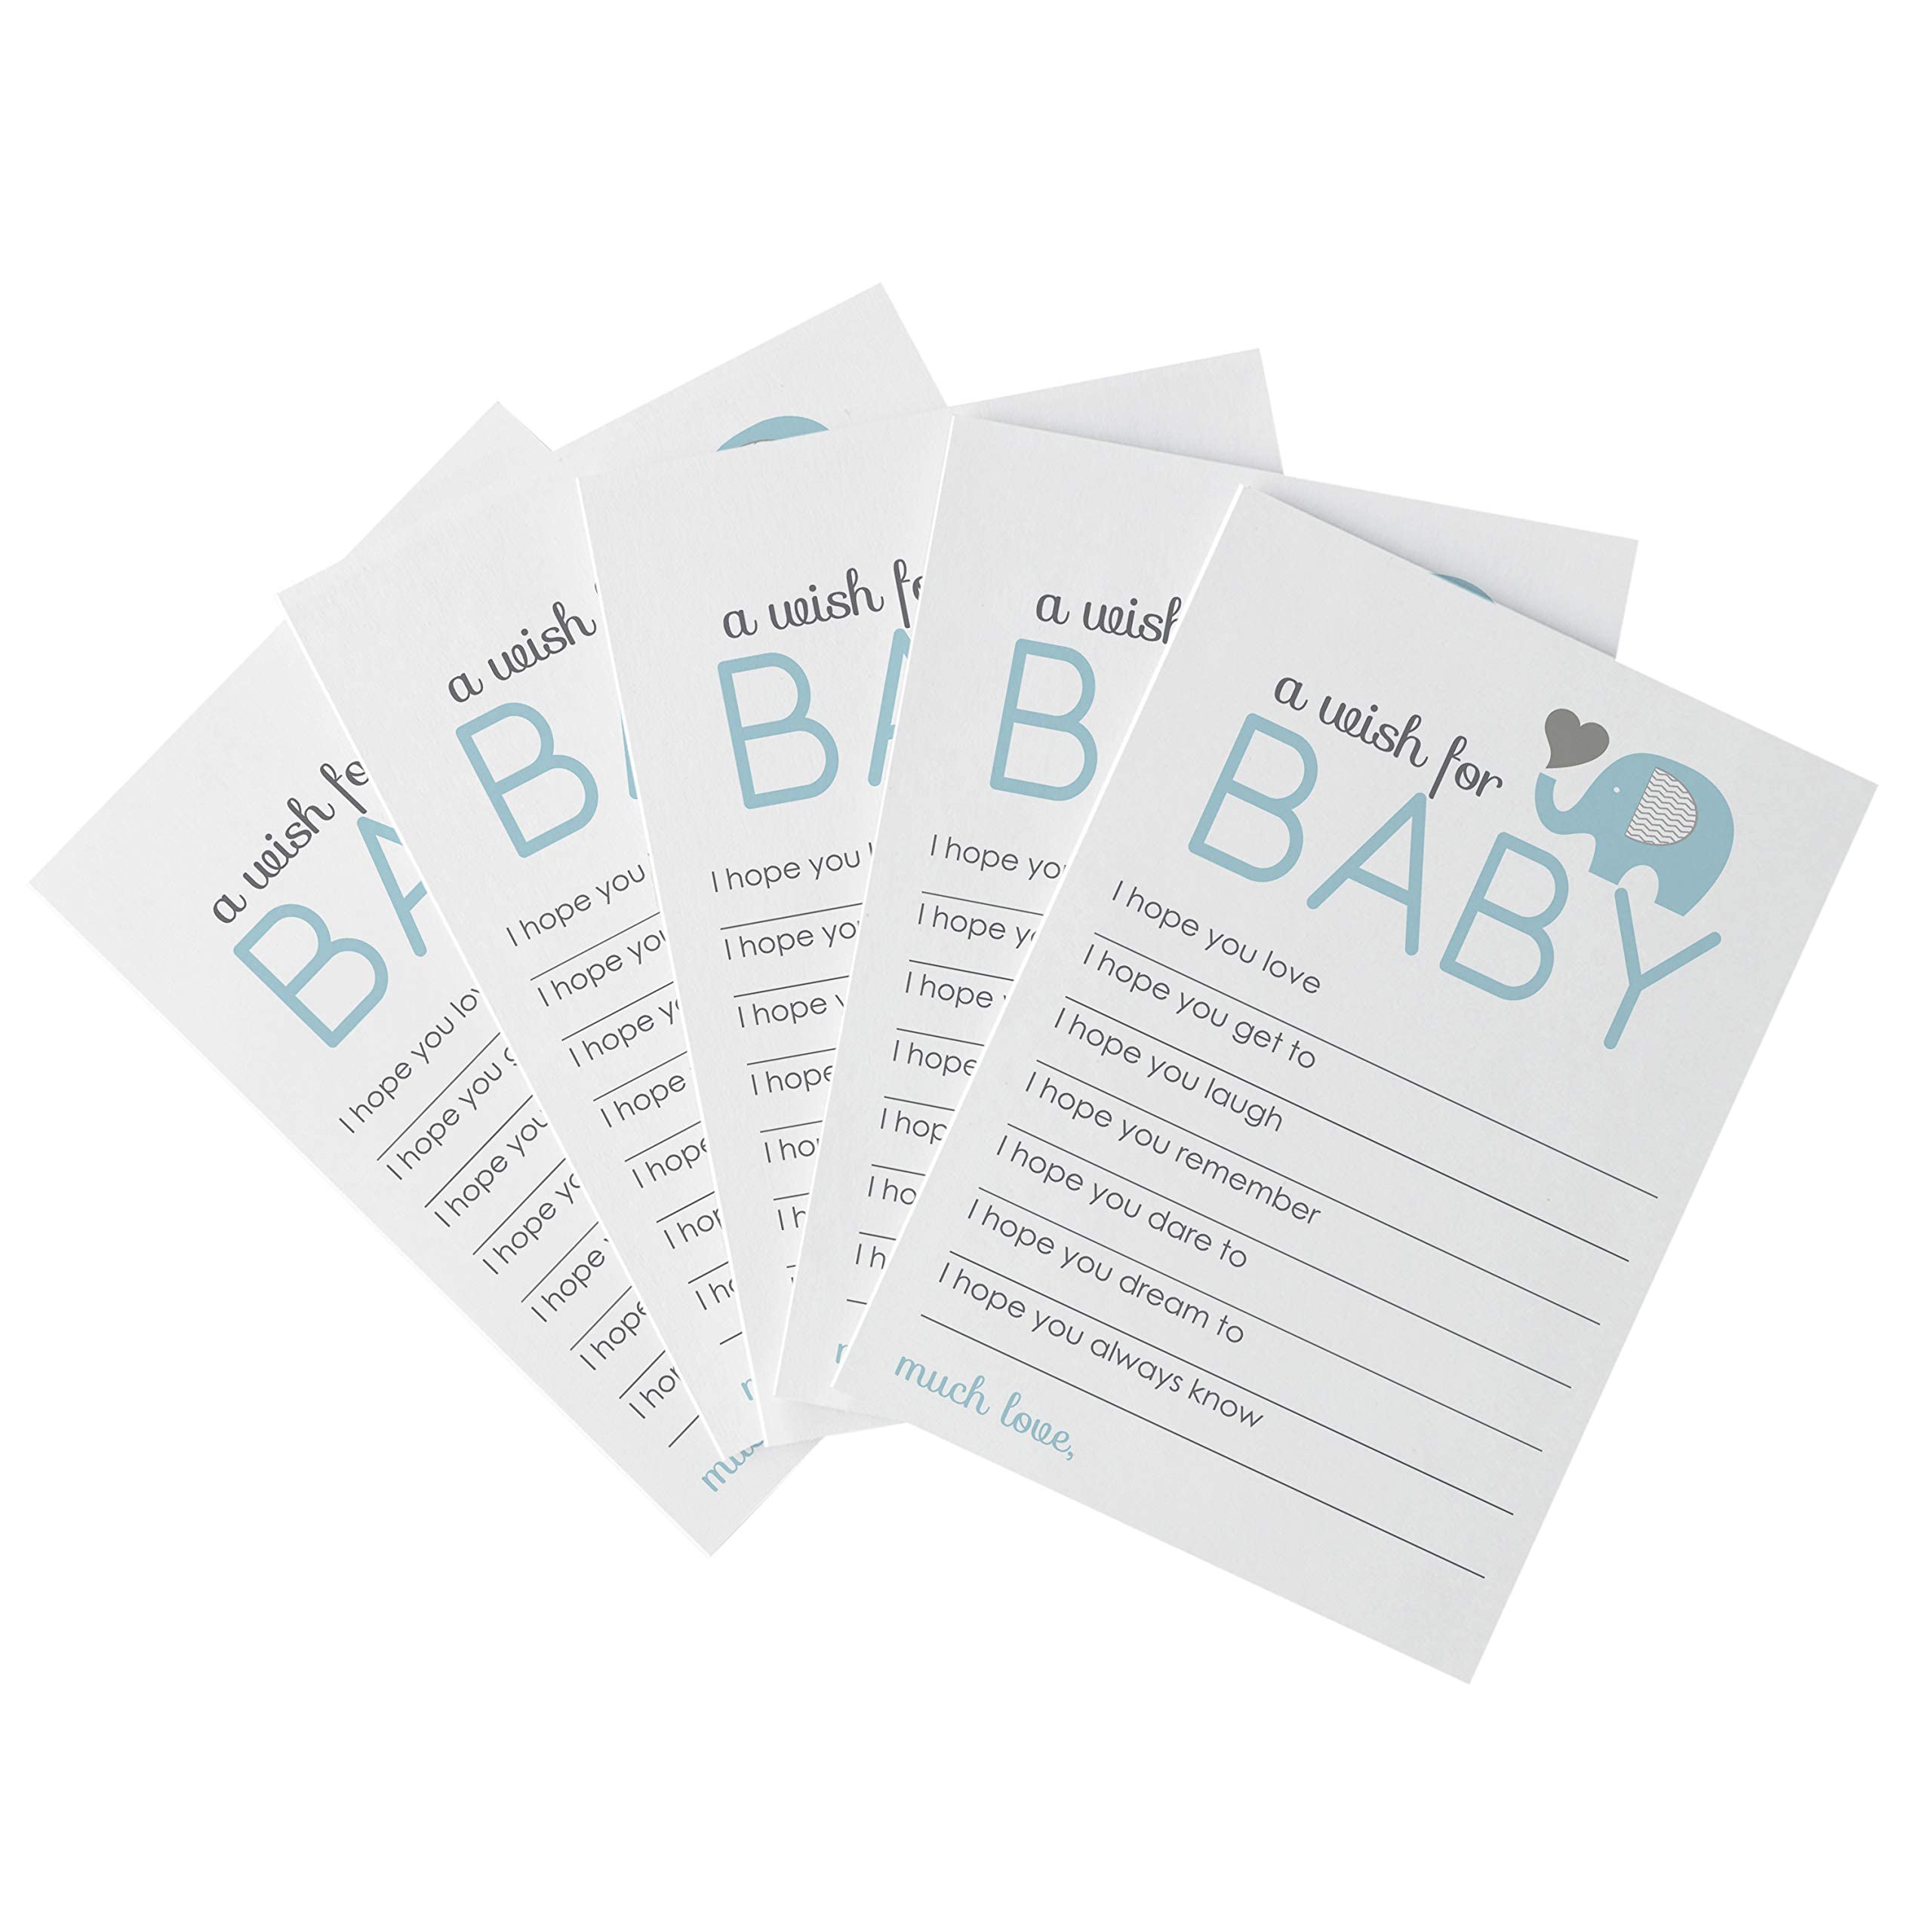 Blue Elephant Wishes for Boys Baby Shower Advice Cand Wish Cards - Parents Keepsake Activity Wishing Well Birthday Memory Ideas Pack of 20 4x6 Set